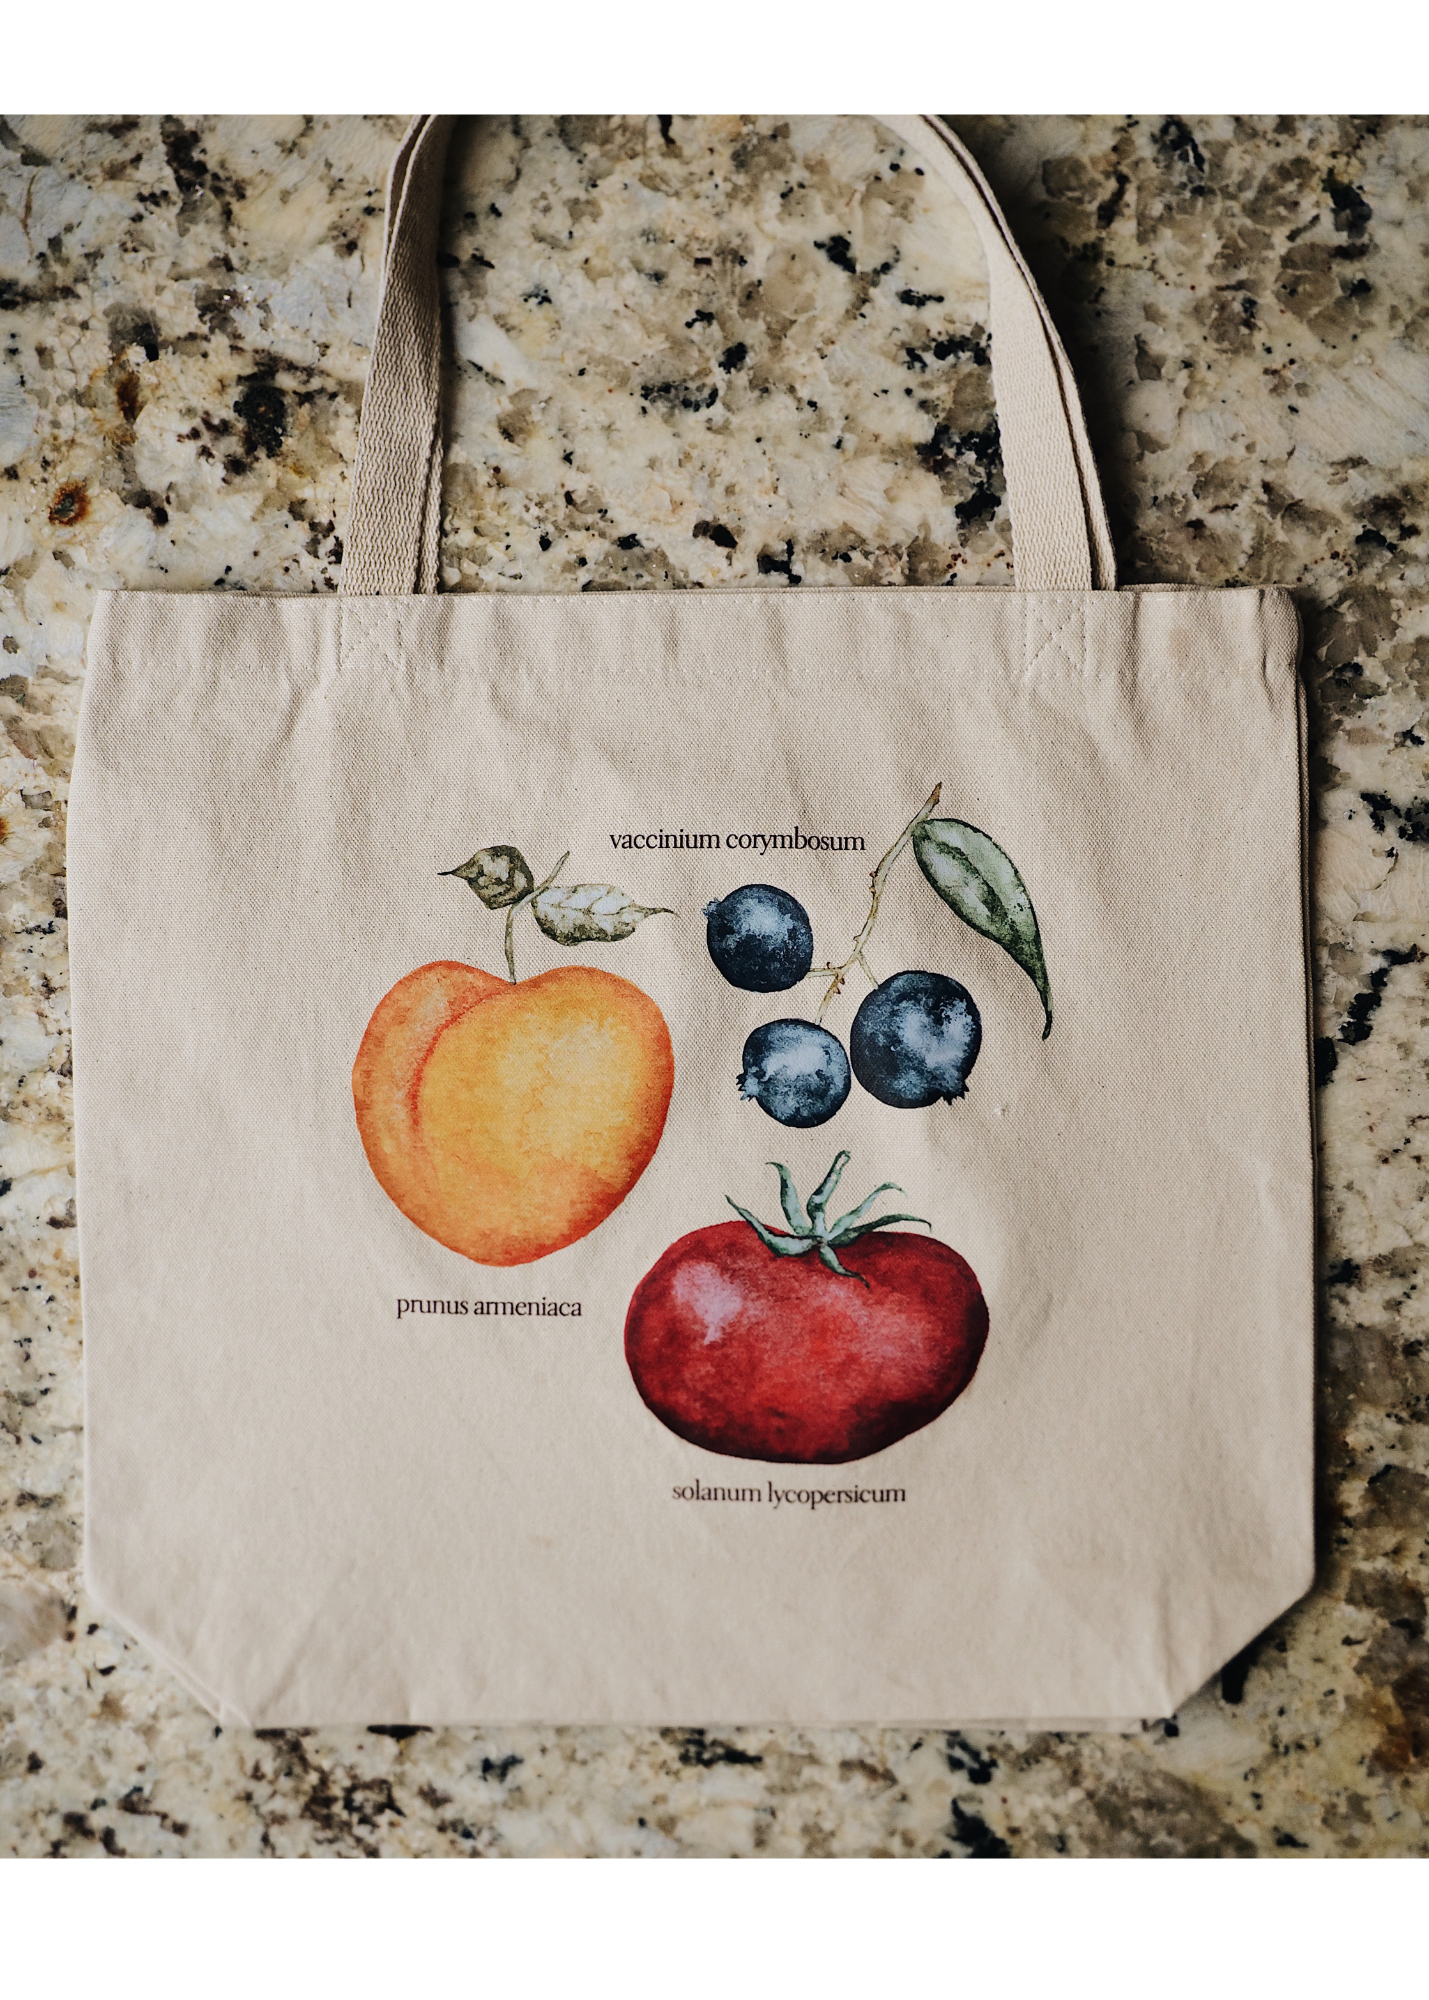 Watercolor Fruit Tote | Summer 2023 Fruit Stand